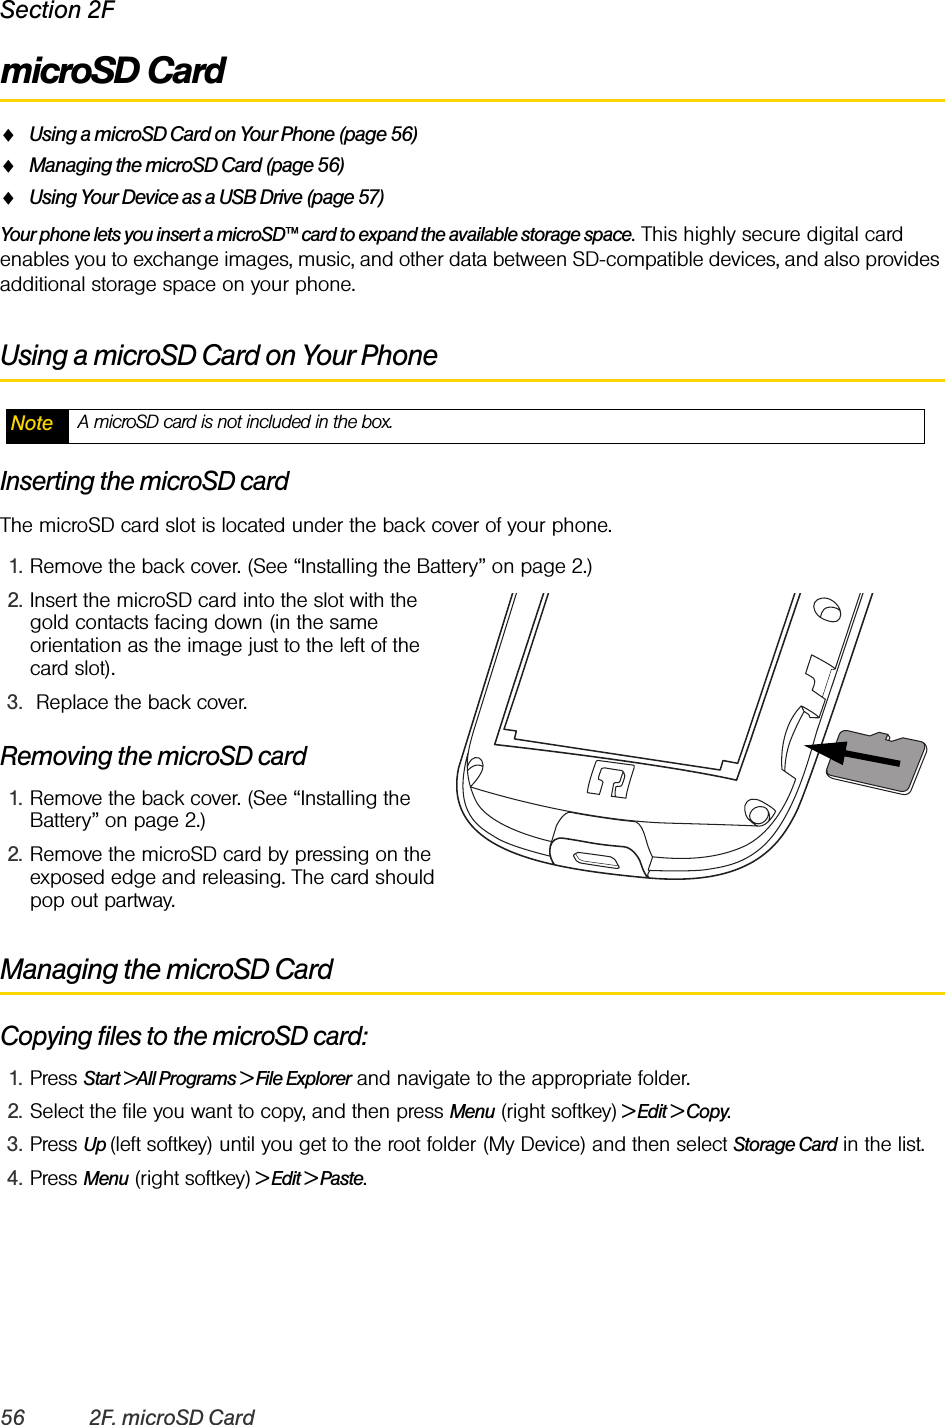 56 2F. microSD CardSection 2FmicroSD CardࡗUsing a microSD Card on Your Phone (page 56)ࡗManaging the microSD Card (page 56)ࡗUsing Your Device as a USB Drive (page 57)Your phone lets you insert a microSD™ card to expand the available storage space. This highly secure digital card enables you to exchange images, music, and other data between SD-compatible devices, and also provides additional storage space on your phone.Using a microSD Card on Your PhoneInserting the microSD cardThe microSD card slot is located under the back cover of your phone.1. Remove the back cover. (See “Installing the Battery” on page 2.)2. Insert the microSD card into the slot with the gold contacts facing down (in the same orientation as the image just to the left of the card slot). 3.  Replace the back cover. Removing the microSD card1. Remove the back cover. (See “Installing the Battery” on page 2.)2. Remove the microSD card by pressing on the exposed edge and releasing. The card should pop out partway.Managing the microSD CardCopying files to the microSD card:1. Press Start &gt;All Programs &gt; File Explorer and navigate to the appropriate folder.2. Select the file you want to copy, and then press Menu (right softkey) &gt; Edit &gt; Copy.3. Press Up (left softkey) until you get to the root folder (My Device) and then select Storage Card in the list.4. Press Menu (right softkey) &gt; Edit &gt; Paste.Note A microSD card is not included in the box.